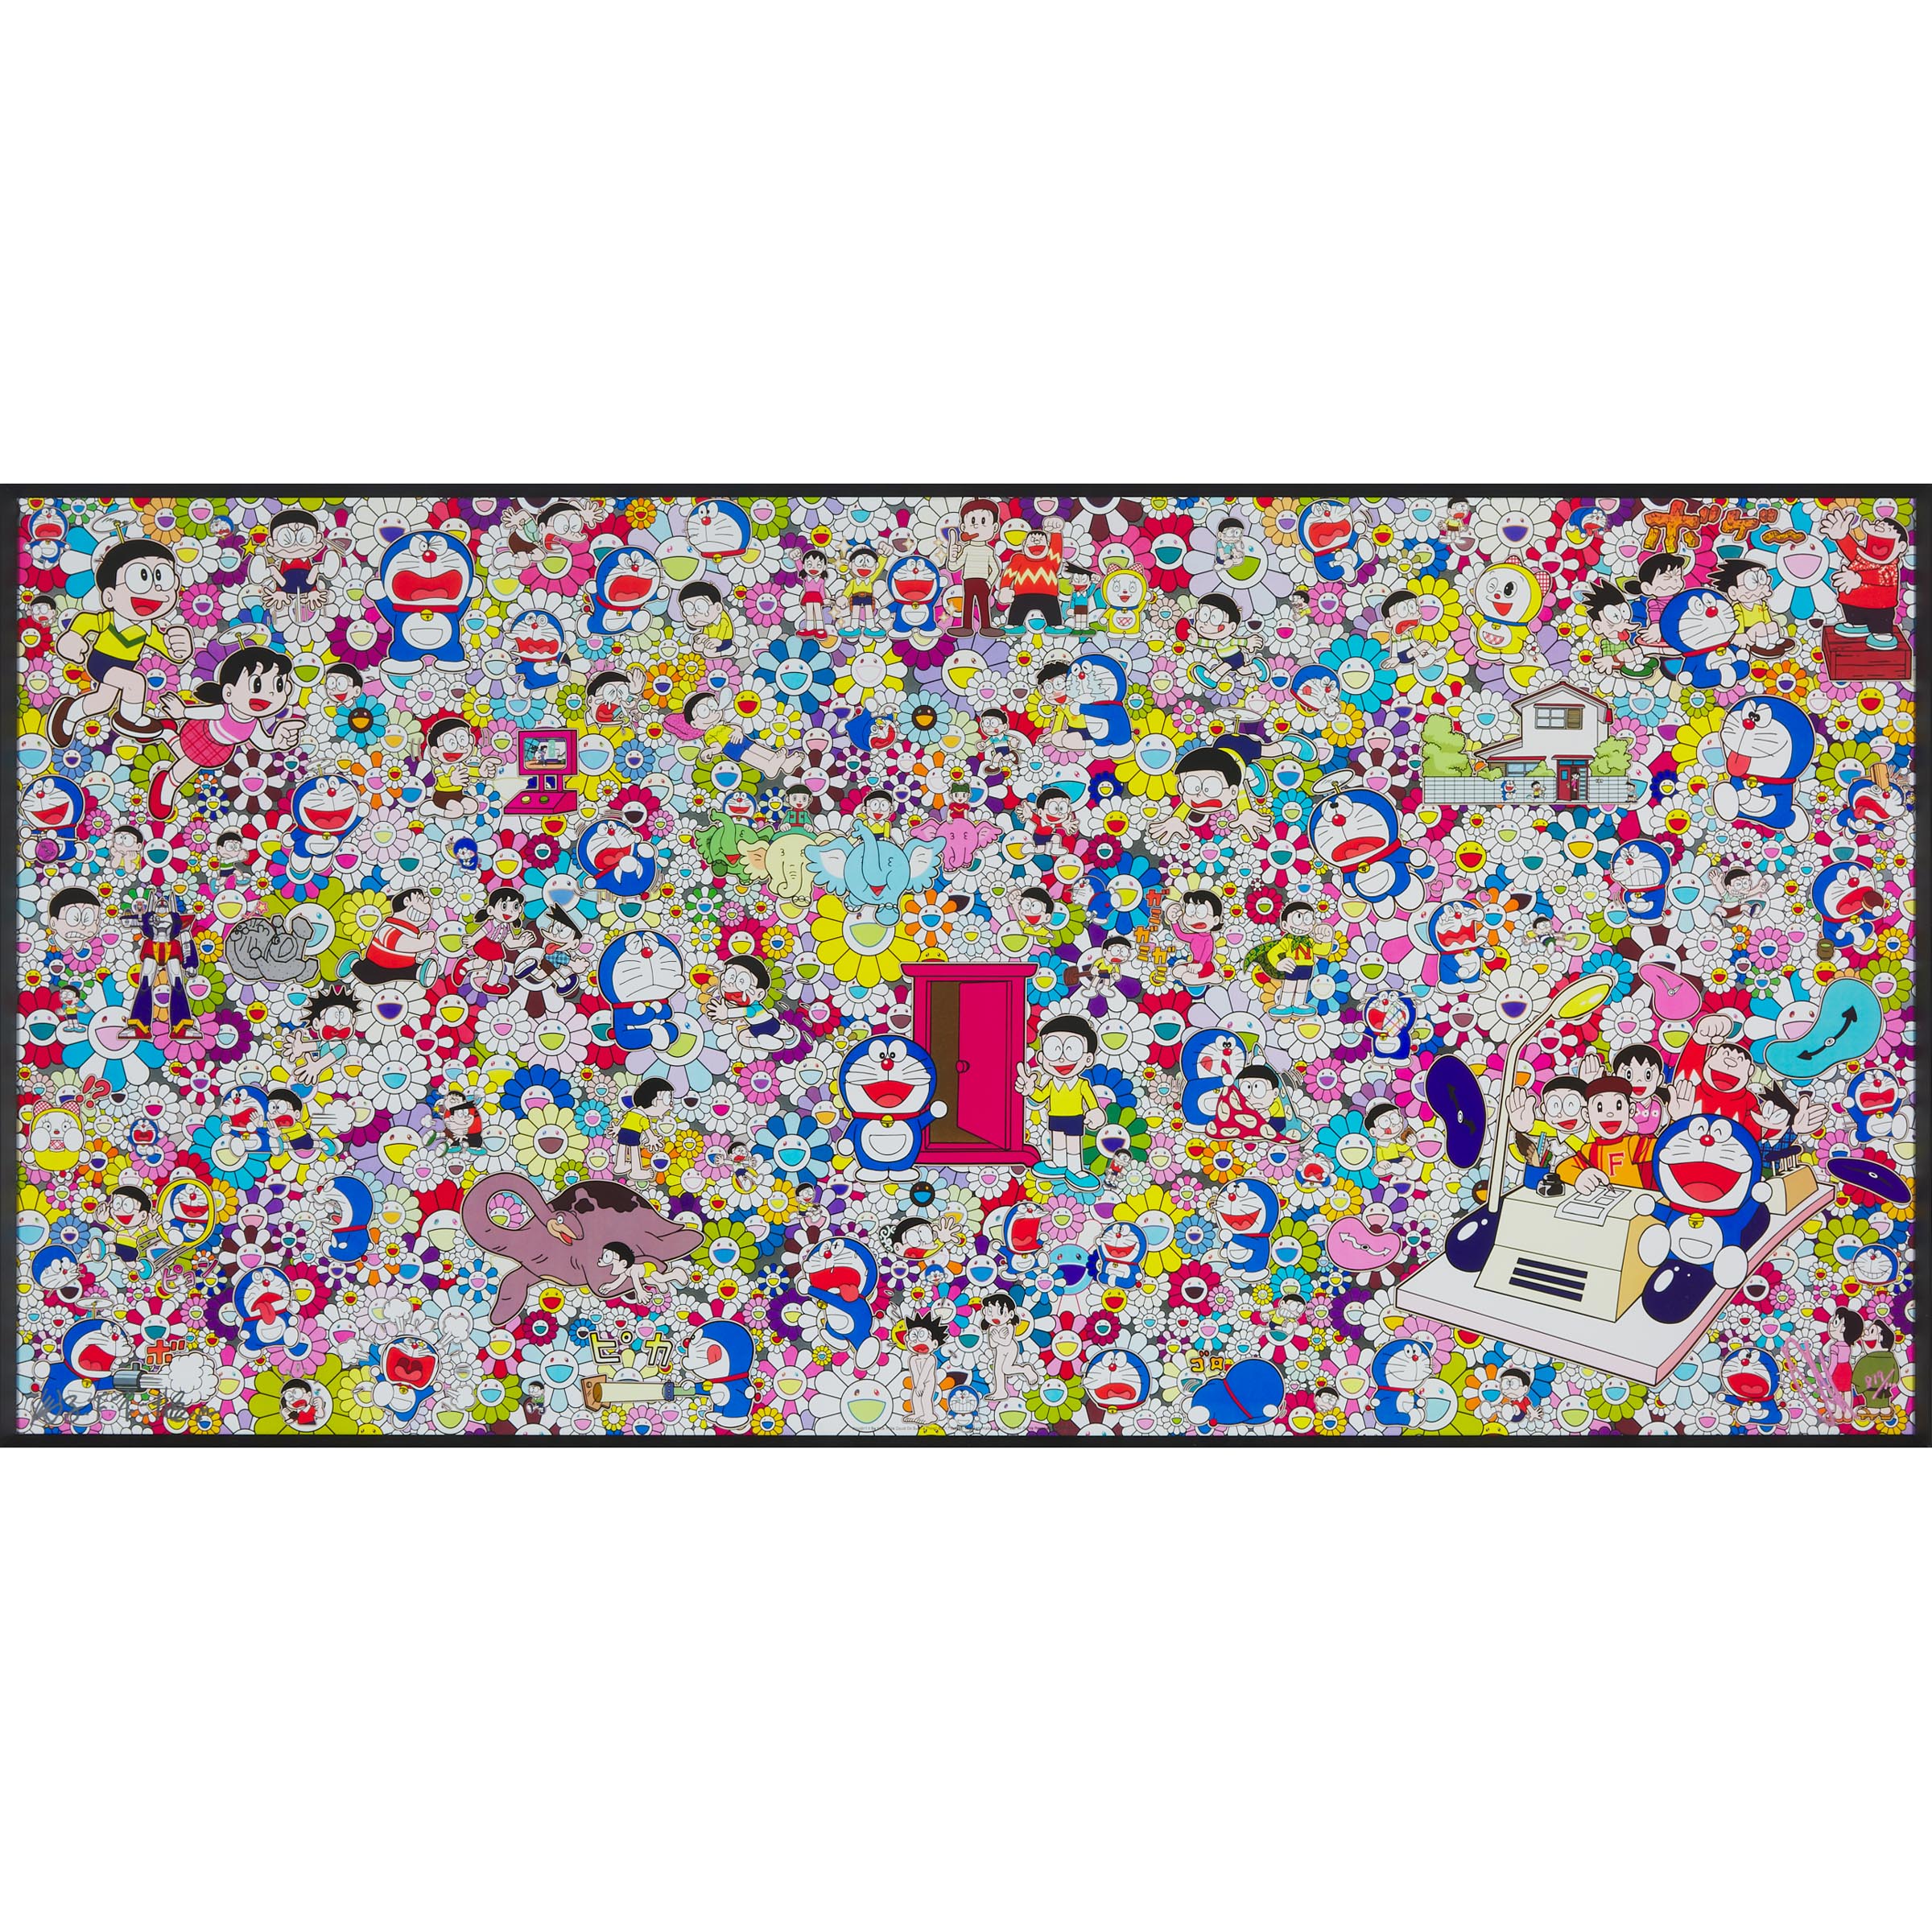 Takashi Murakami (1962-), Wouldn't it Be Nice if We Could Do Such a Thing, 2017